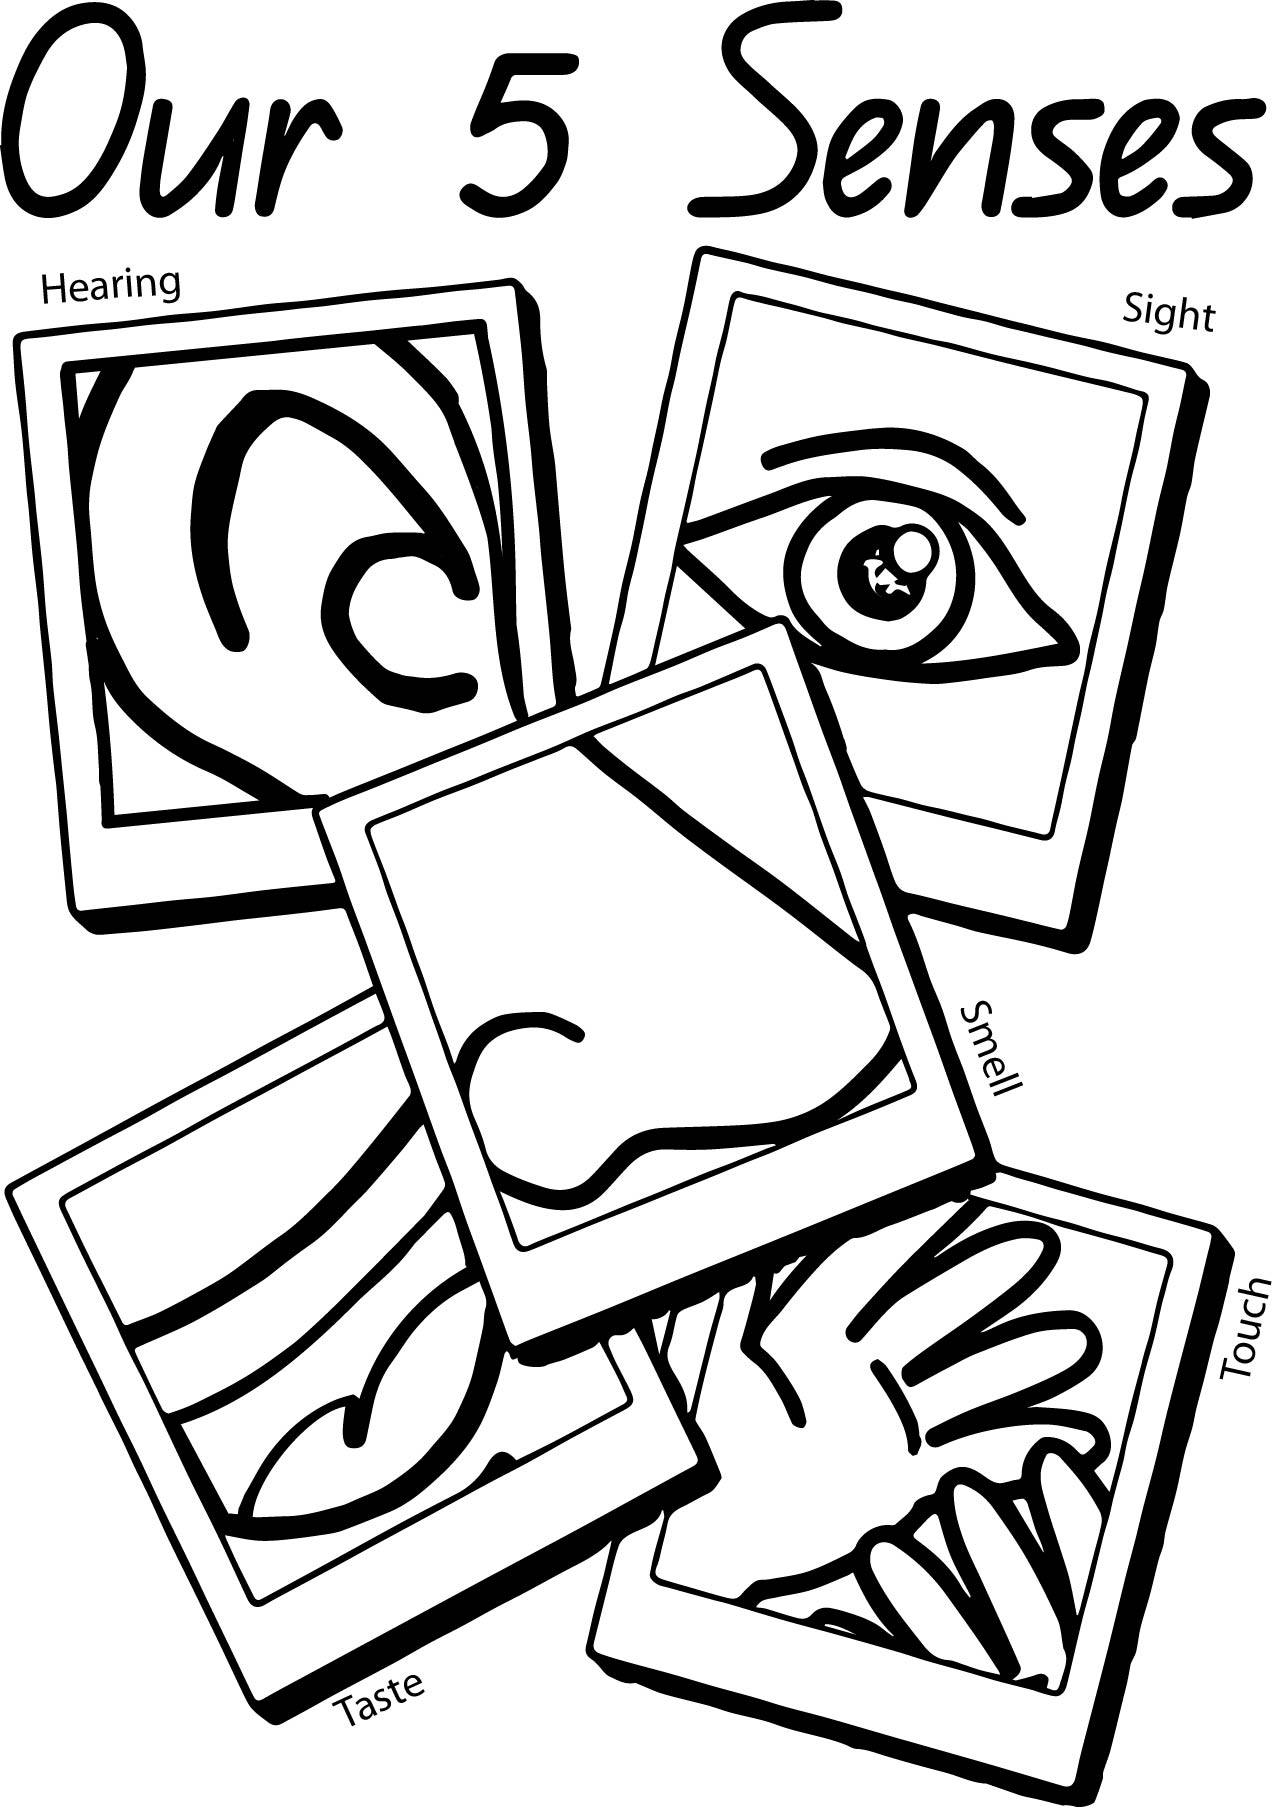 5-senses-coloring-pages-sketch-coloring-page